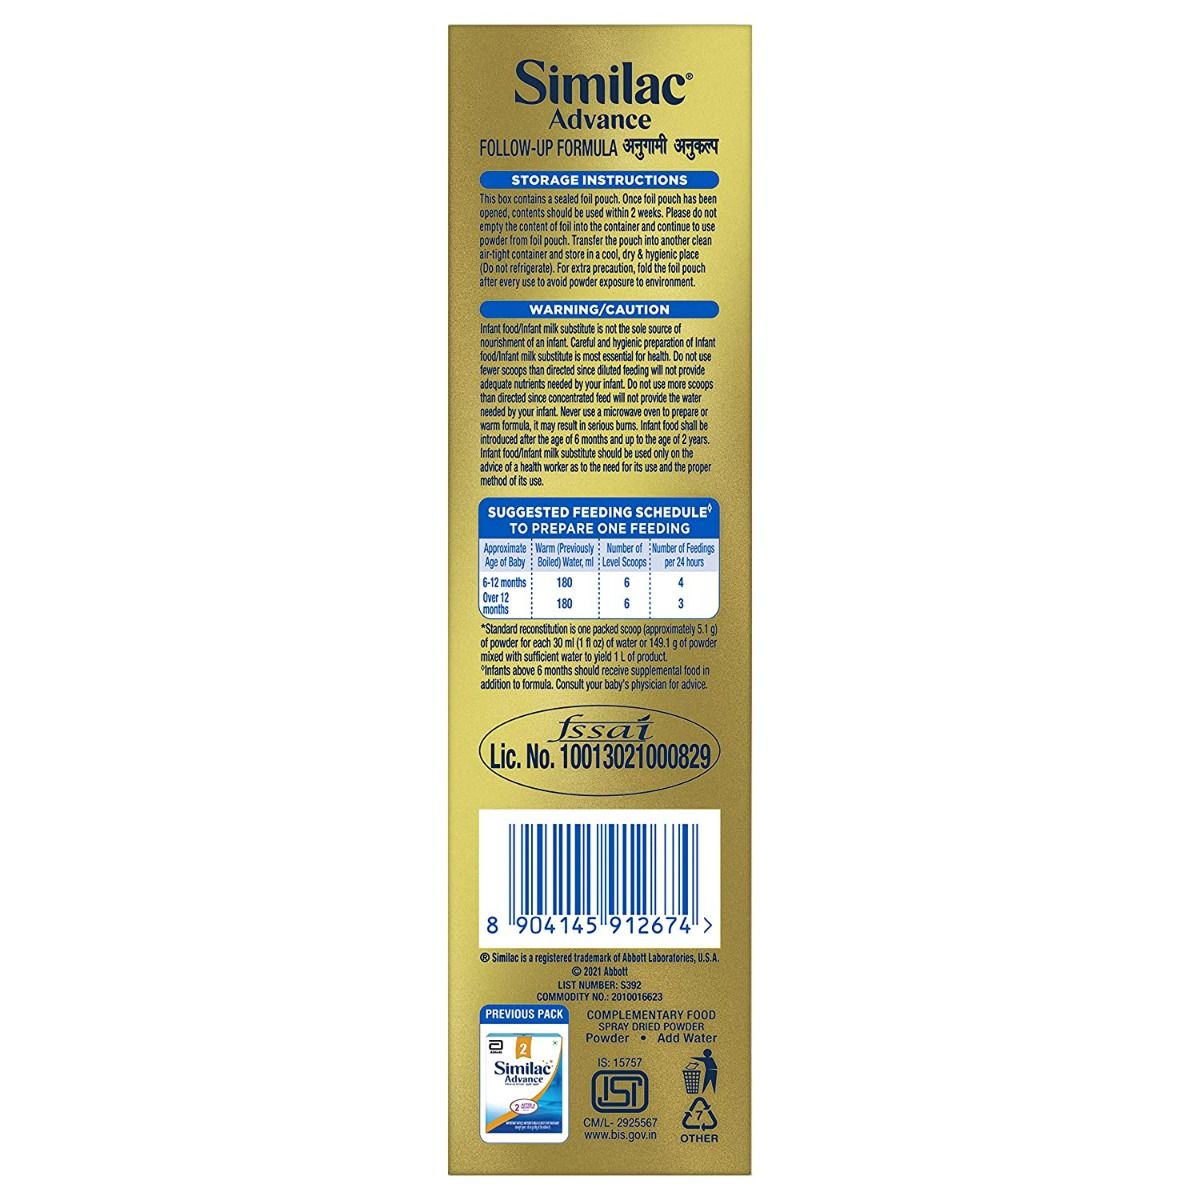 Similac Advance Follow-Up Formula Stage 2 Powder (After 6 Months), 400 gm Refill Pack, Pack of 1 